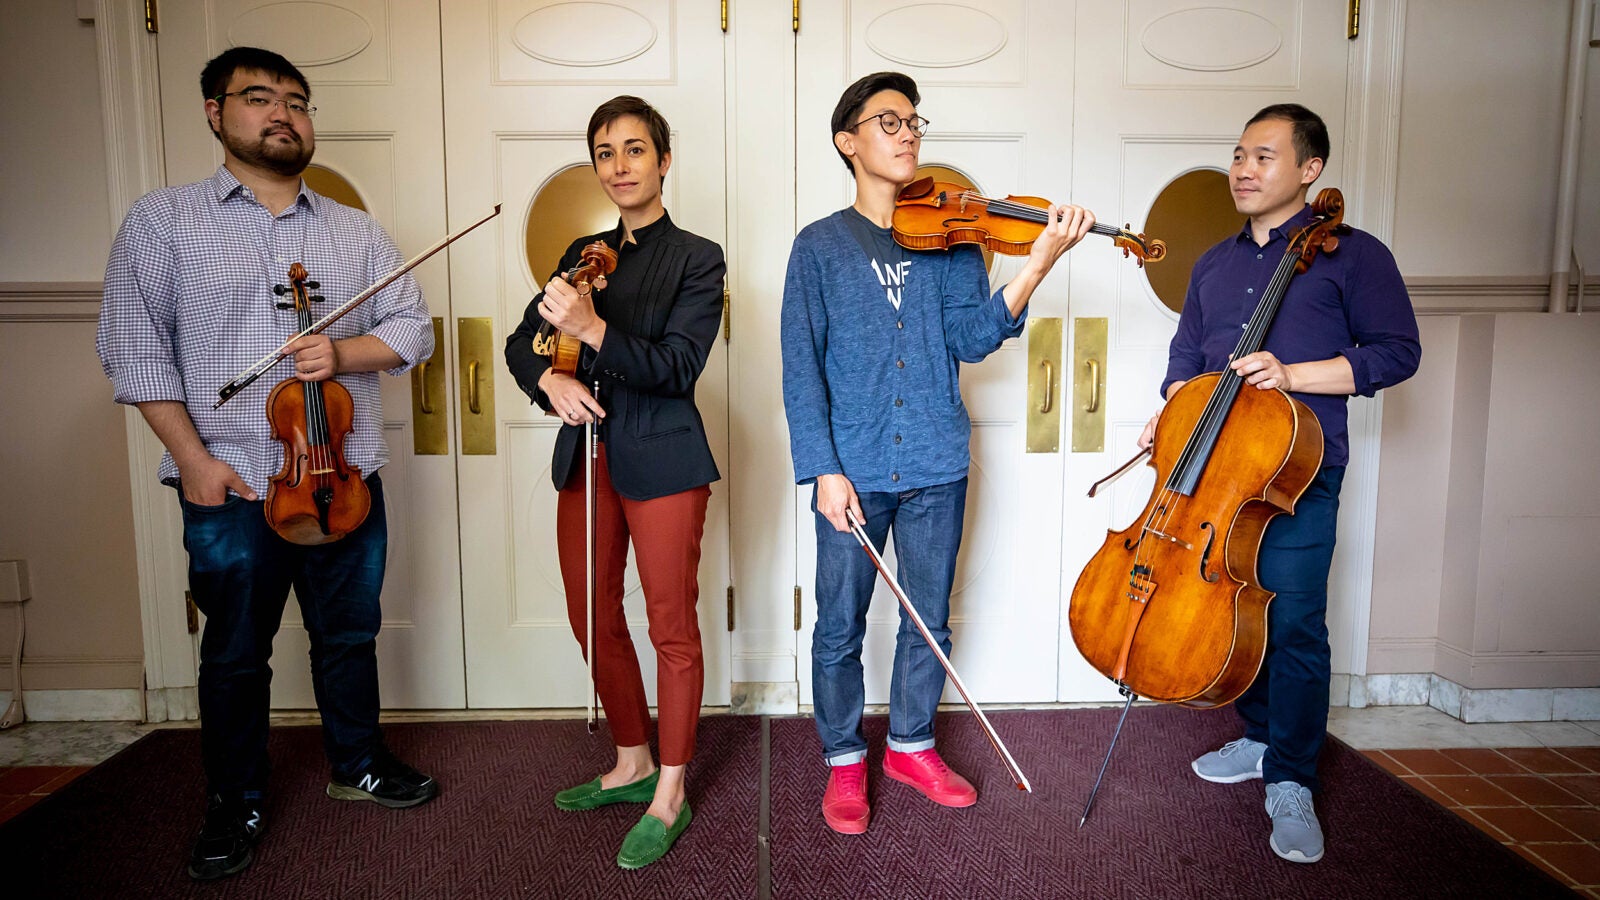 The Parker Quartet — Ken Hamao (from left), Jessica Bodner, Daniel Chong, and Kee-Hyun Kim — have been Blodgett Artists-in-Residence at Harvard since 2014.